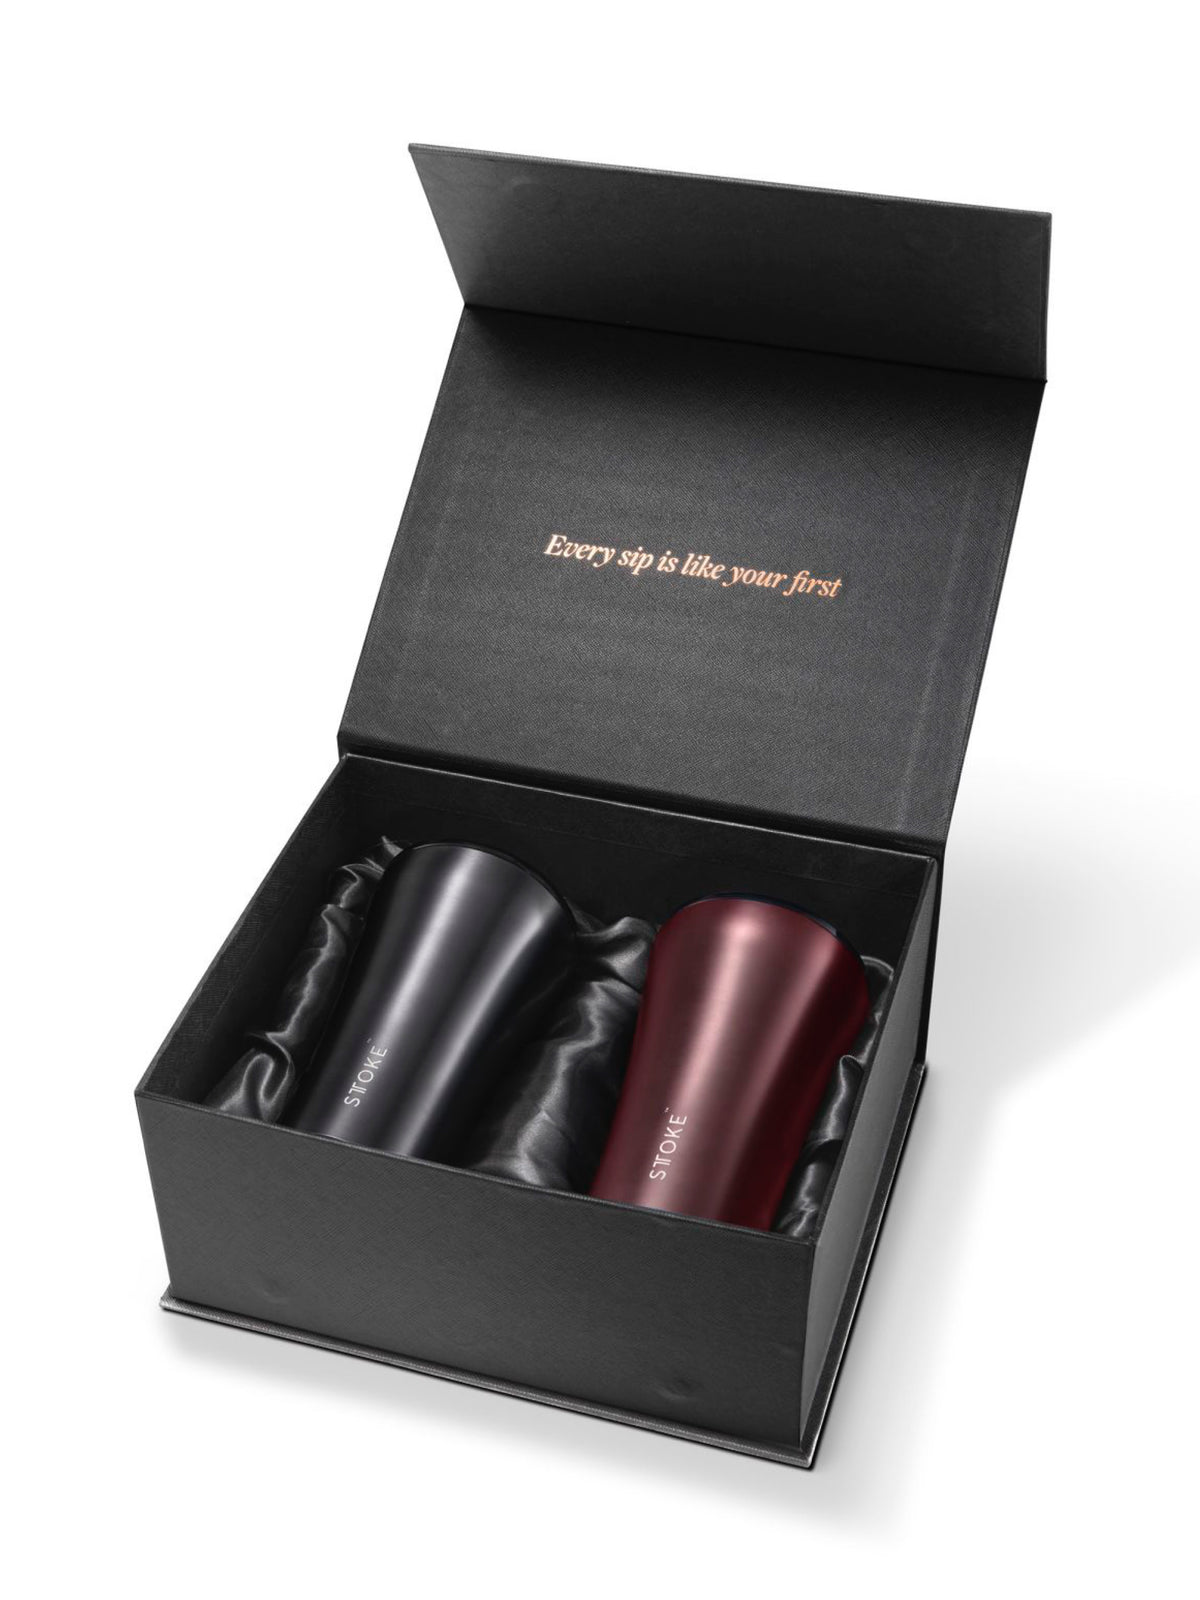 Sttoke Limited Edition Insulated Ceramic Cup 12oz Gift Box